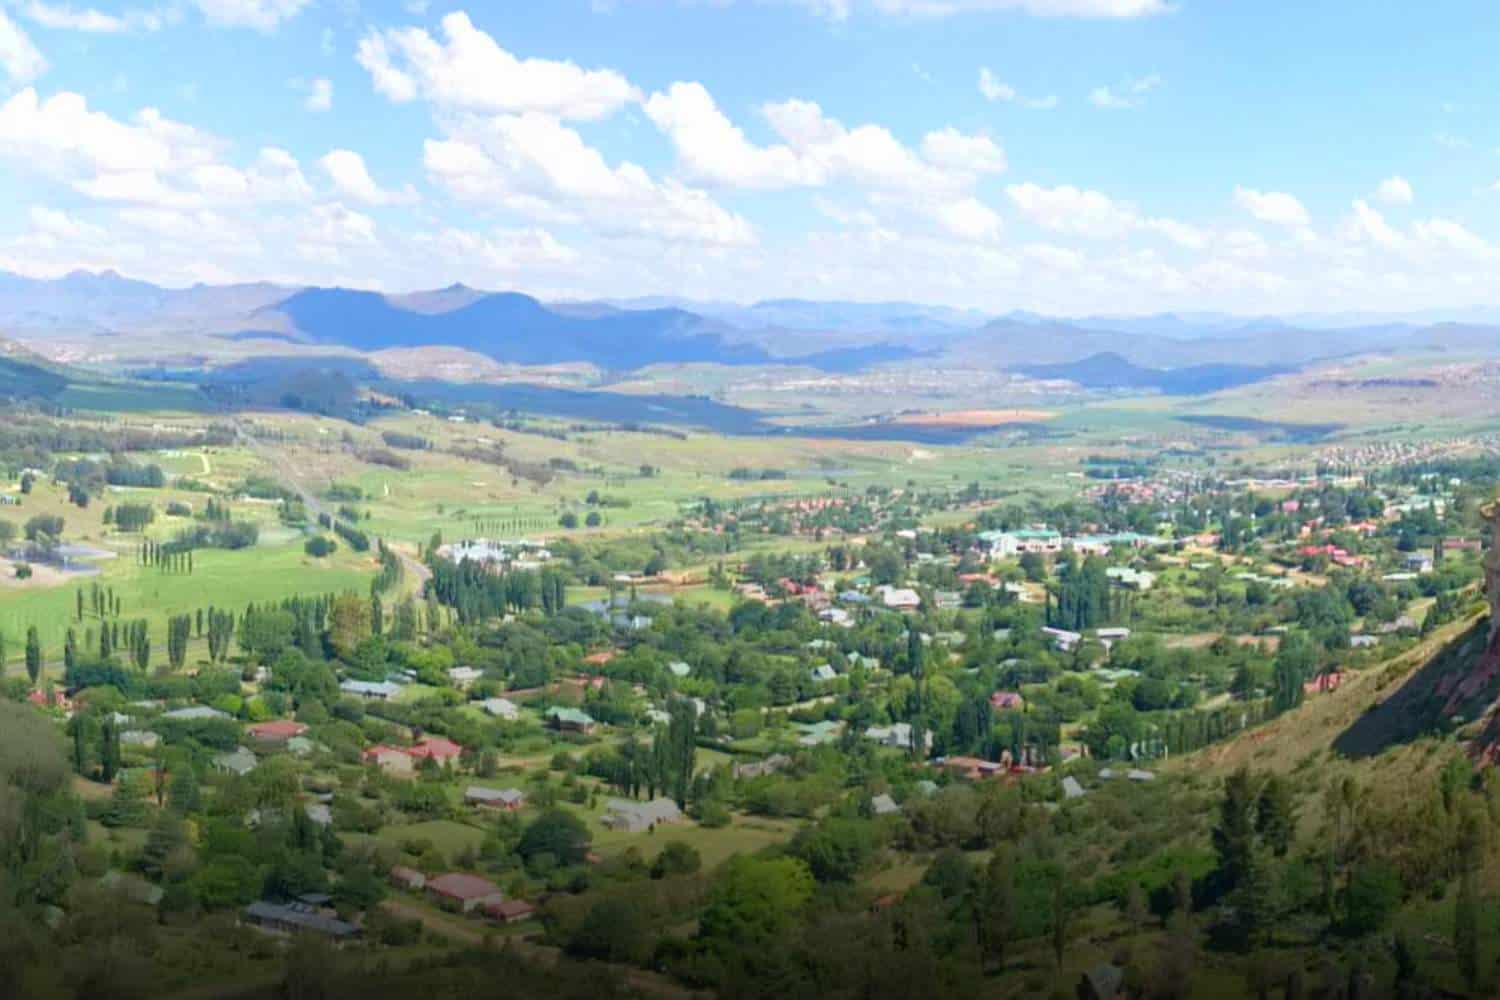 Free State travel guide When to visit, Places to visit, Safety suggestions clarens